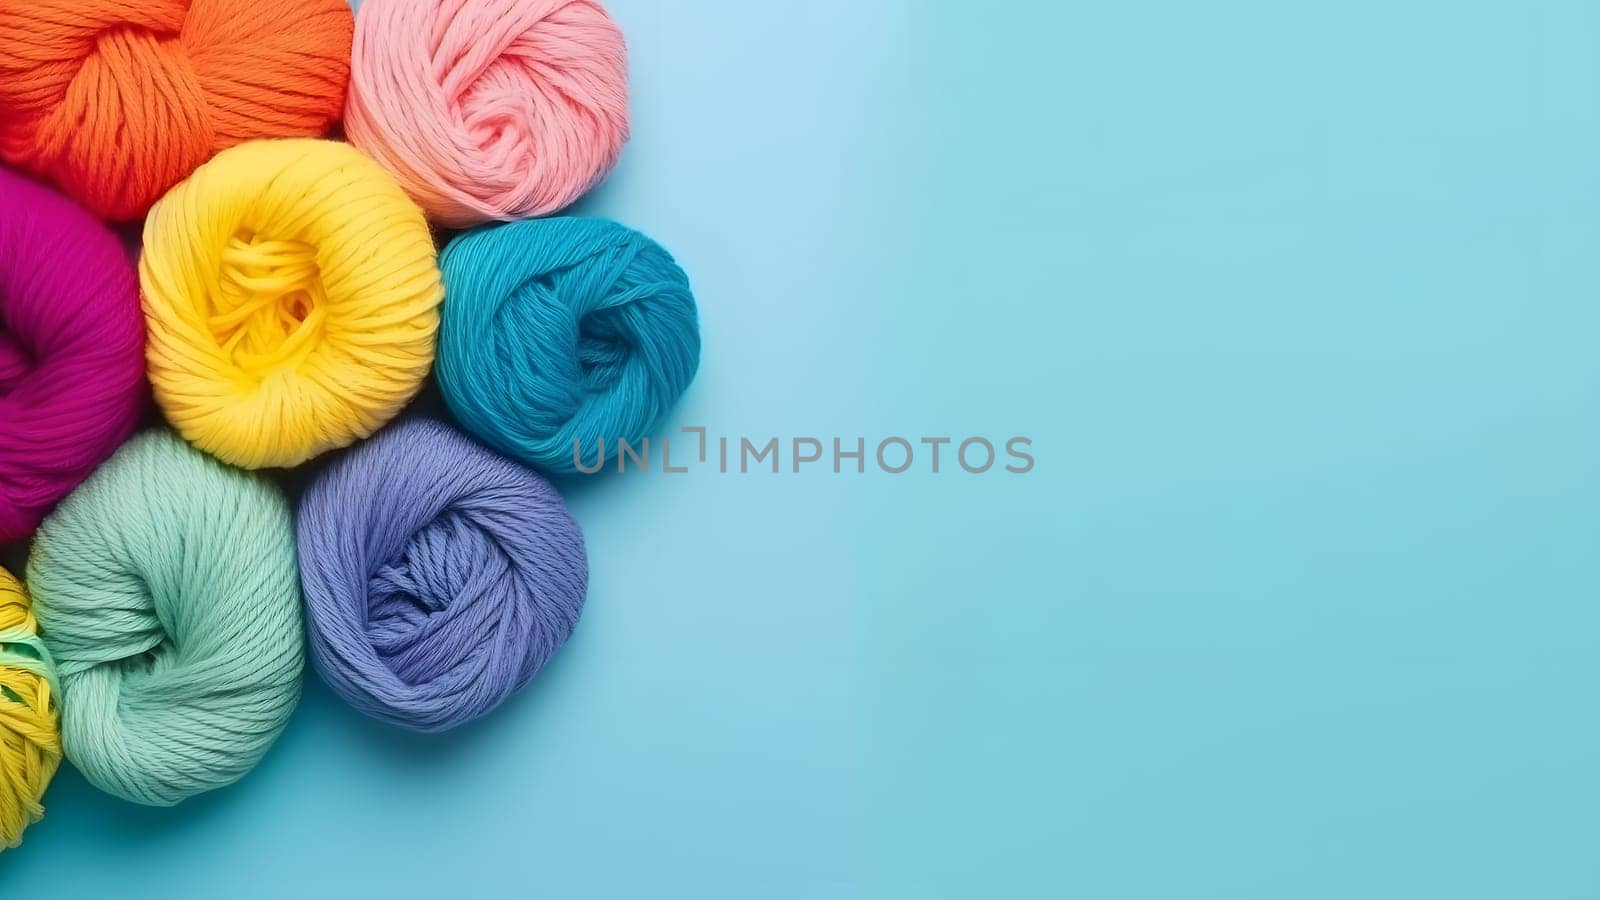 Knitting background with rainbow colorful yarn over blue background with copy space, neural network generated picture by z1b